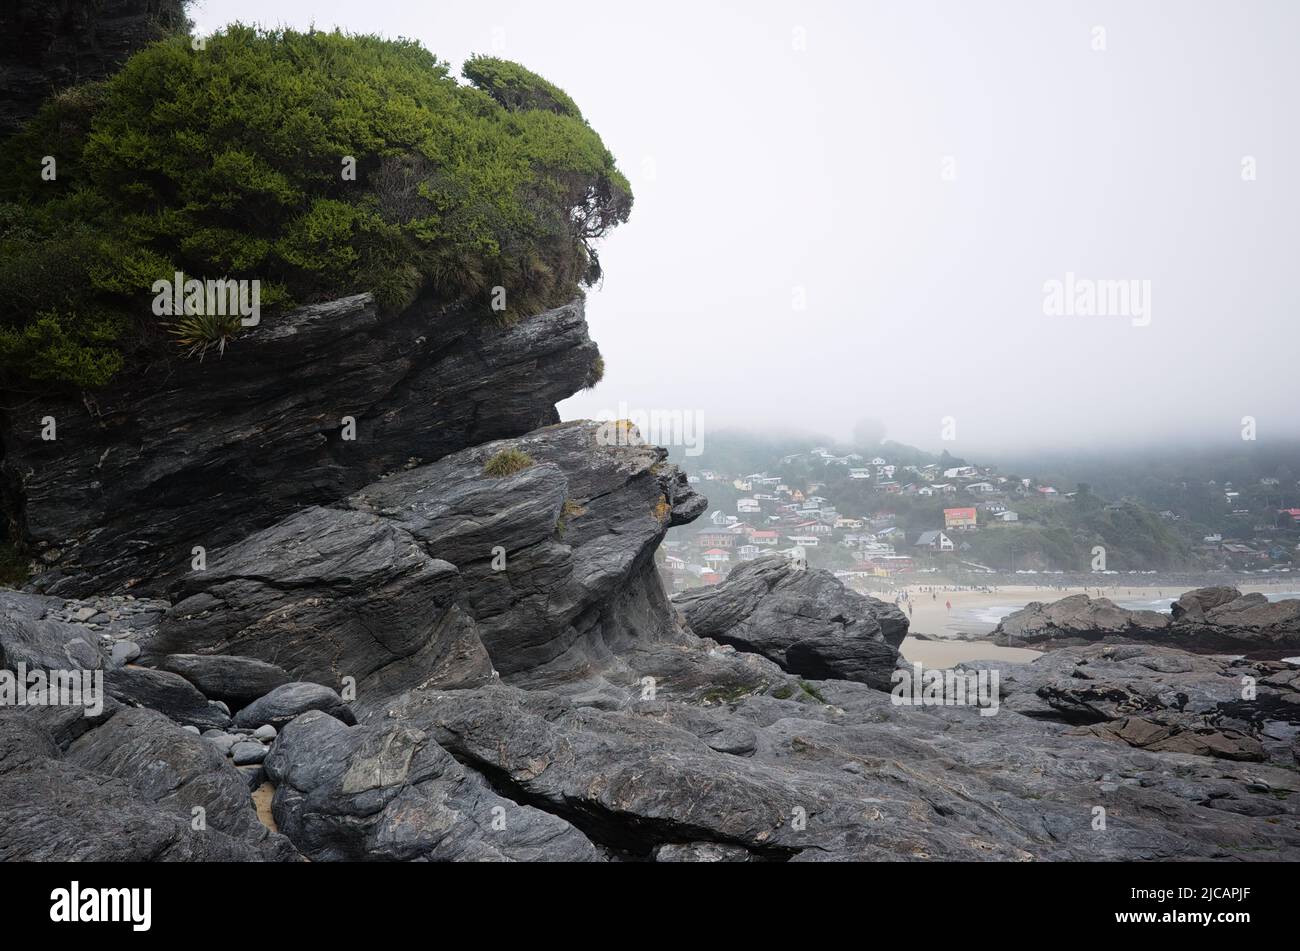 Volcanic rock formation on Pacific coast of Chile, near Maicolpue village, Los Lagos. Playa Rio Sur beach and hills with houses in fog on background Stock Photo